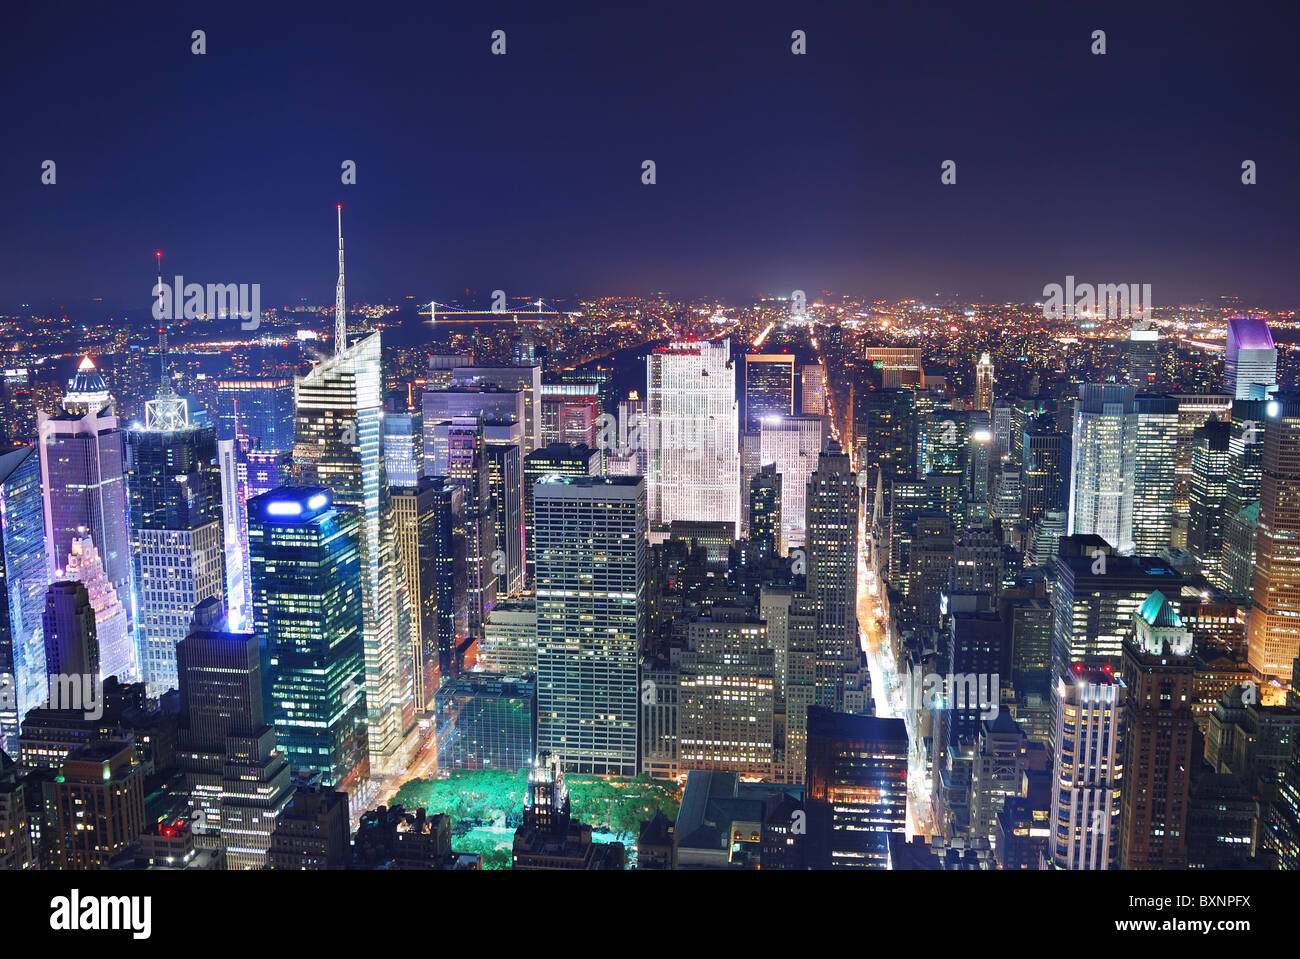 New York City Manhattan Times Square Panorama Aerial View At Night With Office Building Skyscrapers Skyline Illuminated Stock Photo Alamy